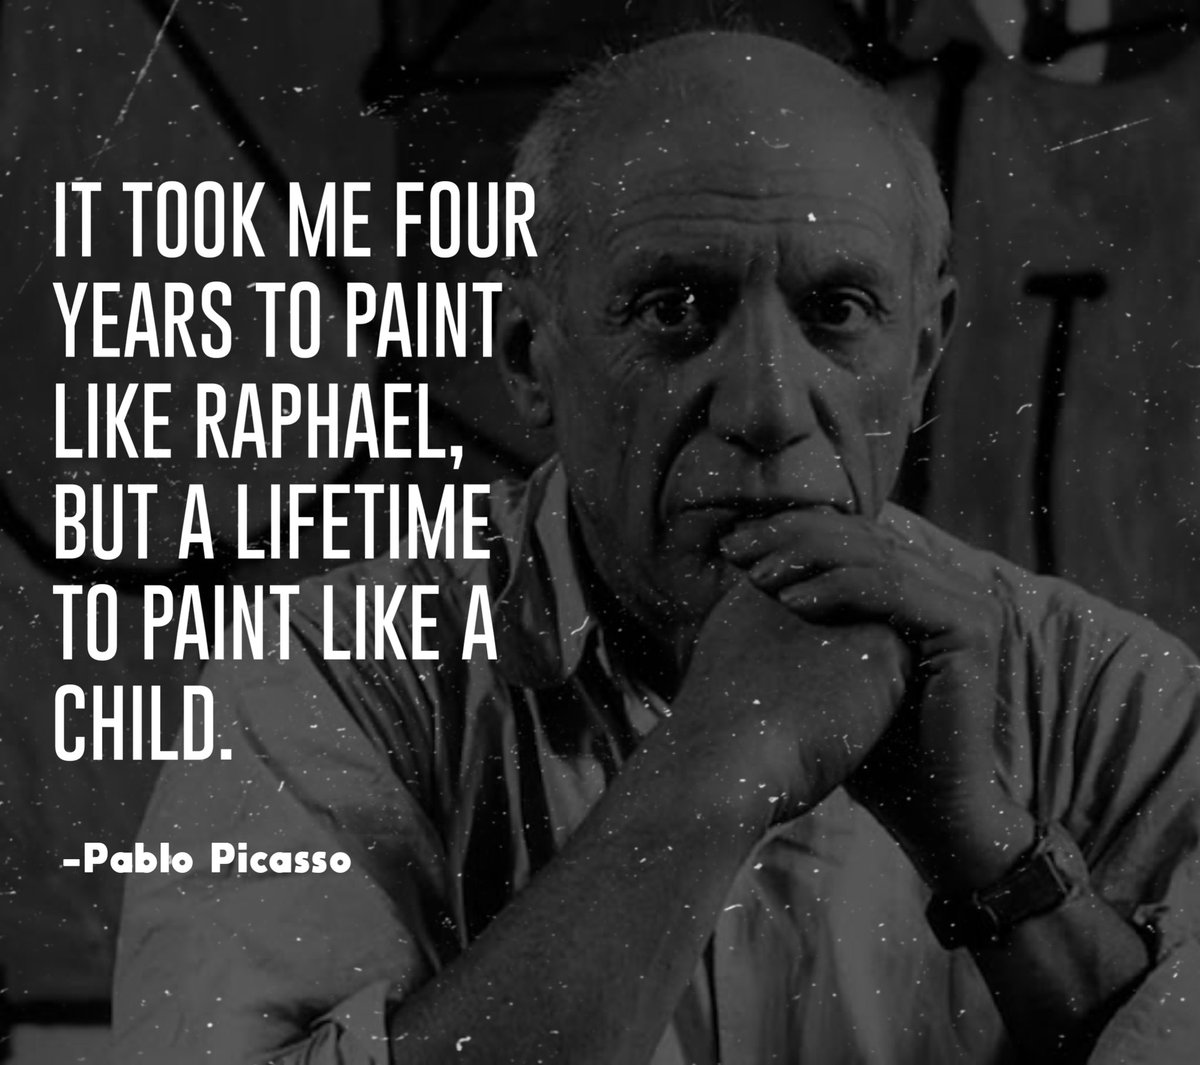 A simple statement🗣️ with a powerful meaning by Pablo Picasso 👇

Kindly tag an art lover to this post 
#art
#painting
#pablopicasso
#blackartist
#creativity
#artgallery
#Africanart
#Nigerianartist